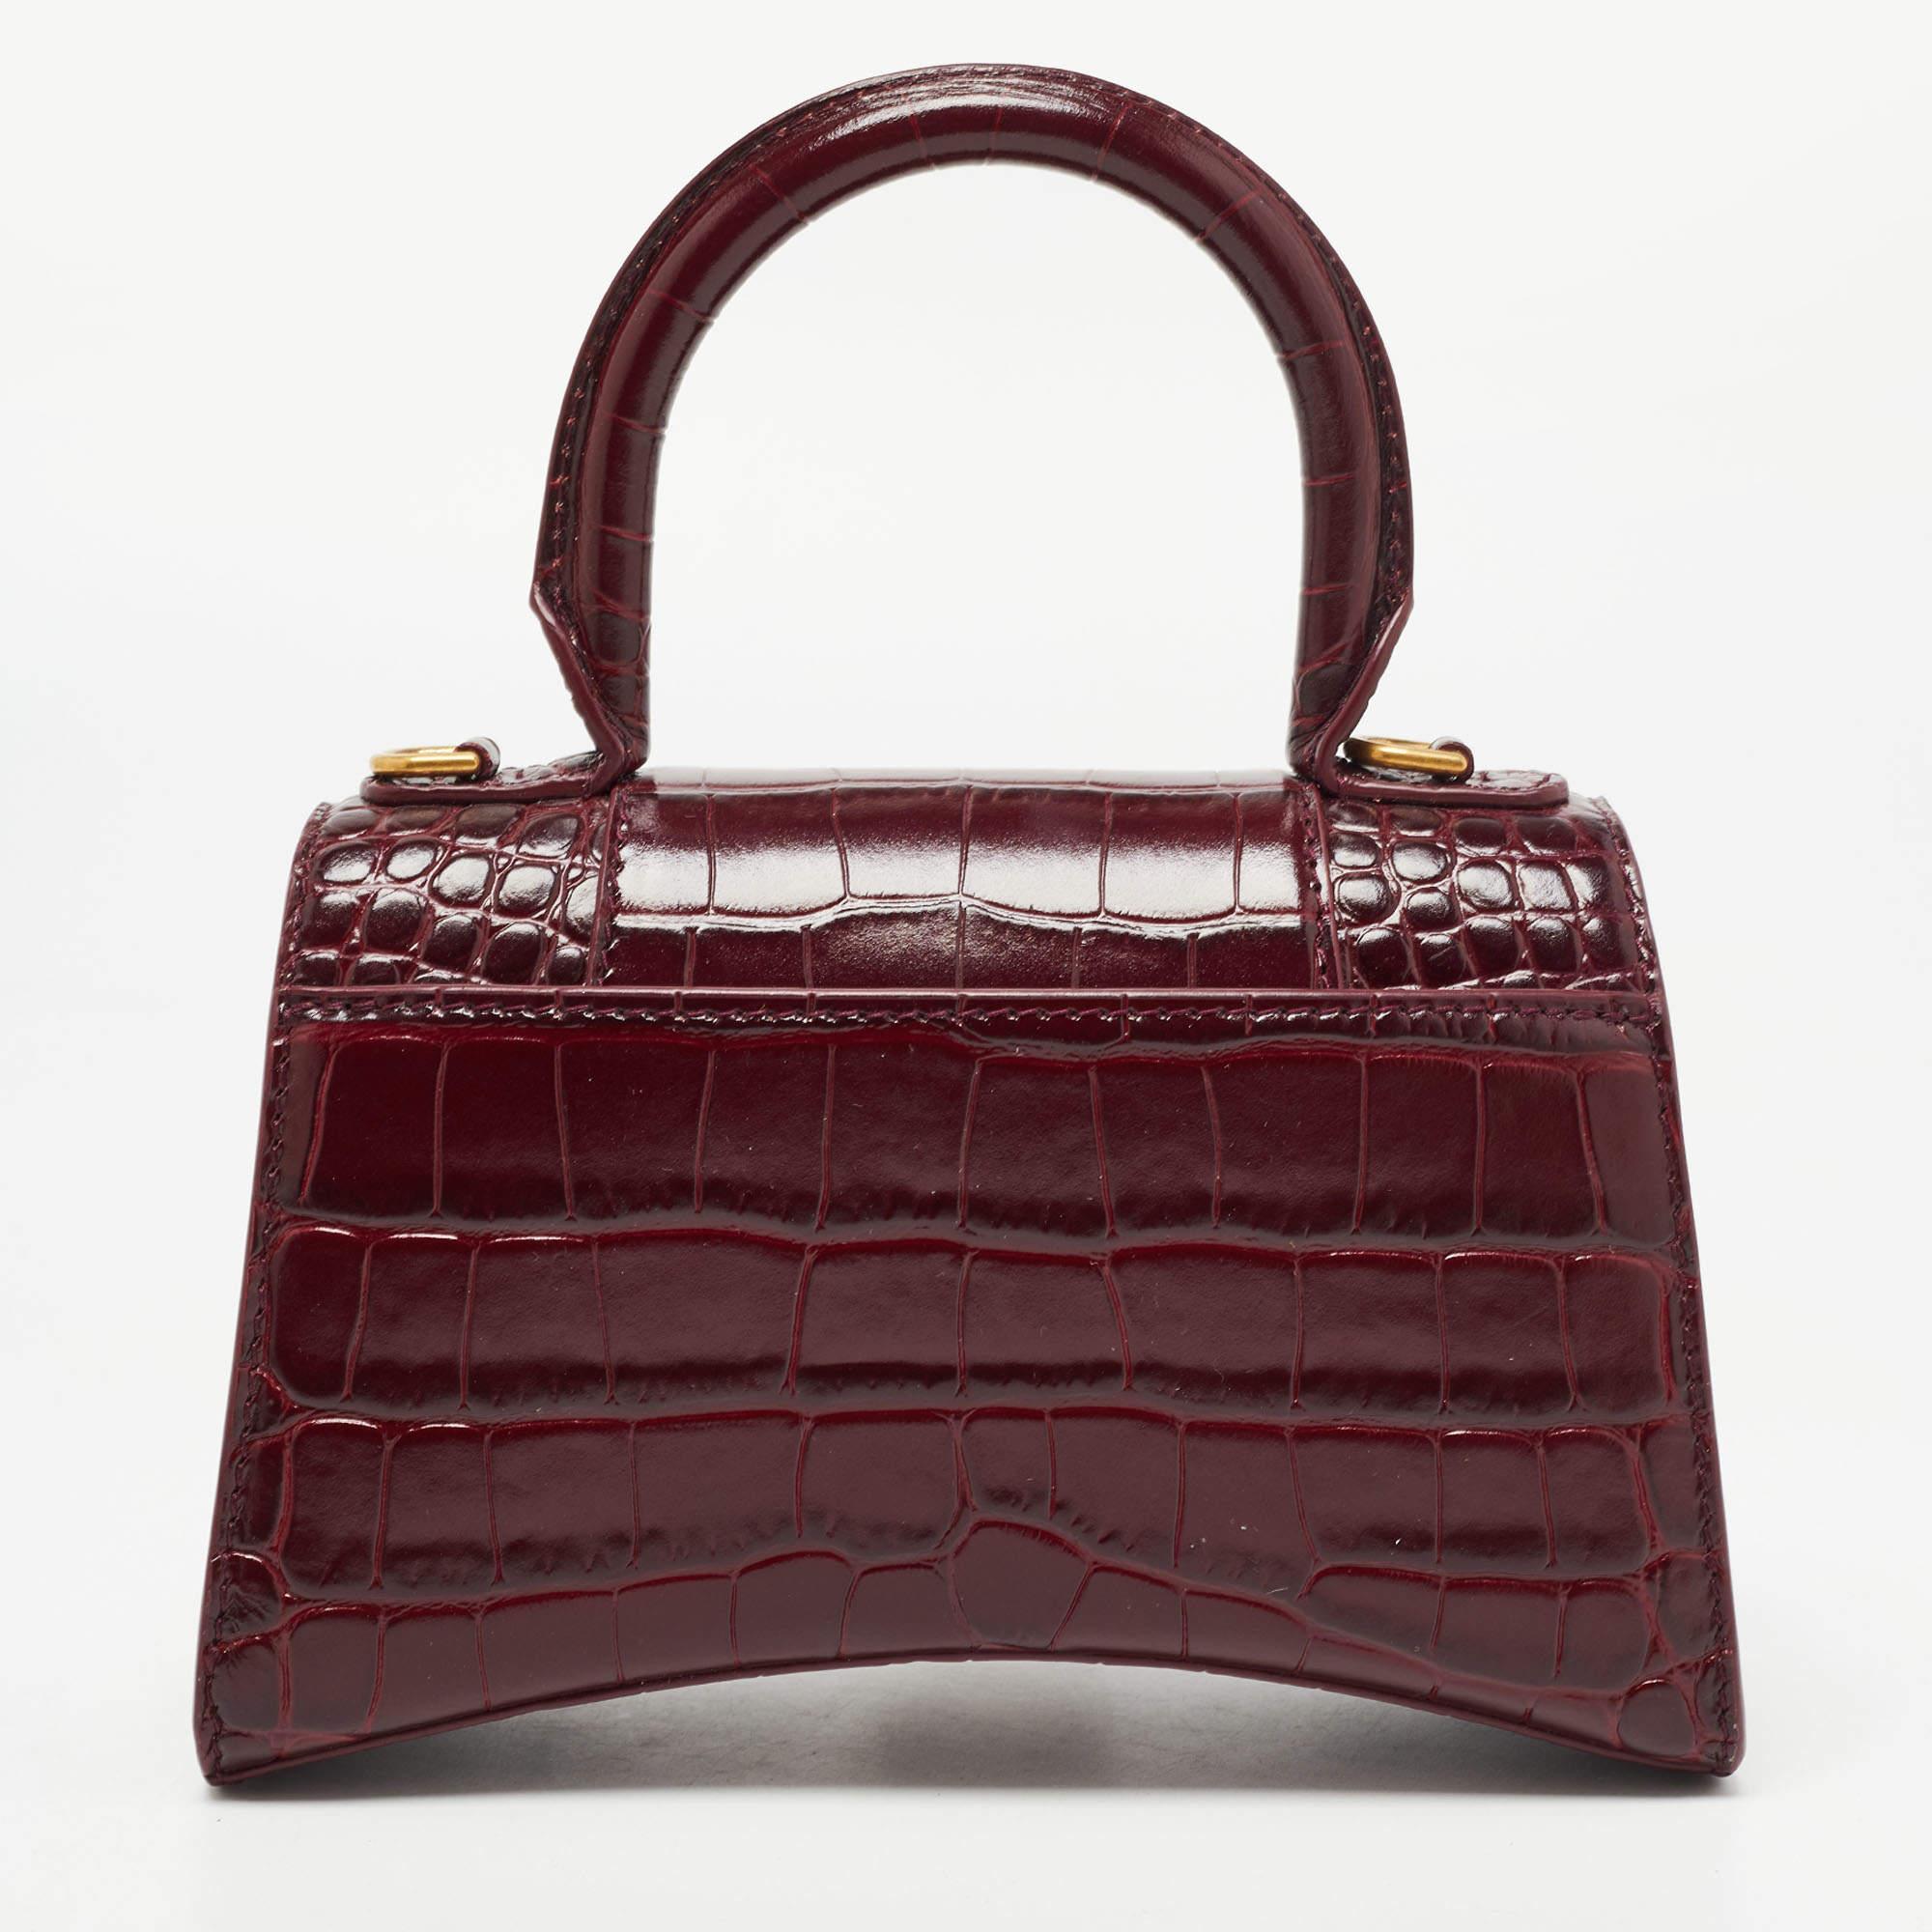 Balenciaga's Hourglass is inspired by the silhouettes of its sculptural blazers of the 1950s and, with its very distinctive shape, knows how to start a conversation. The curved bottom of this croc-embossed leather construction is beautifully